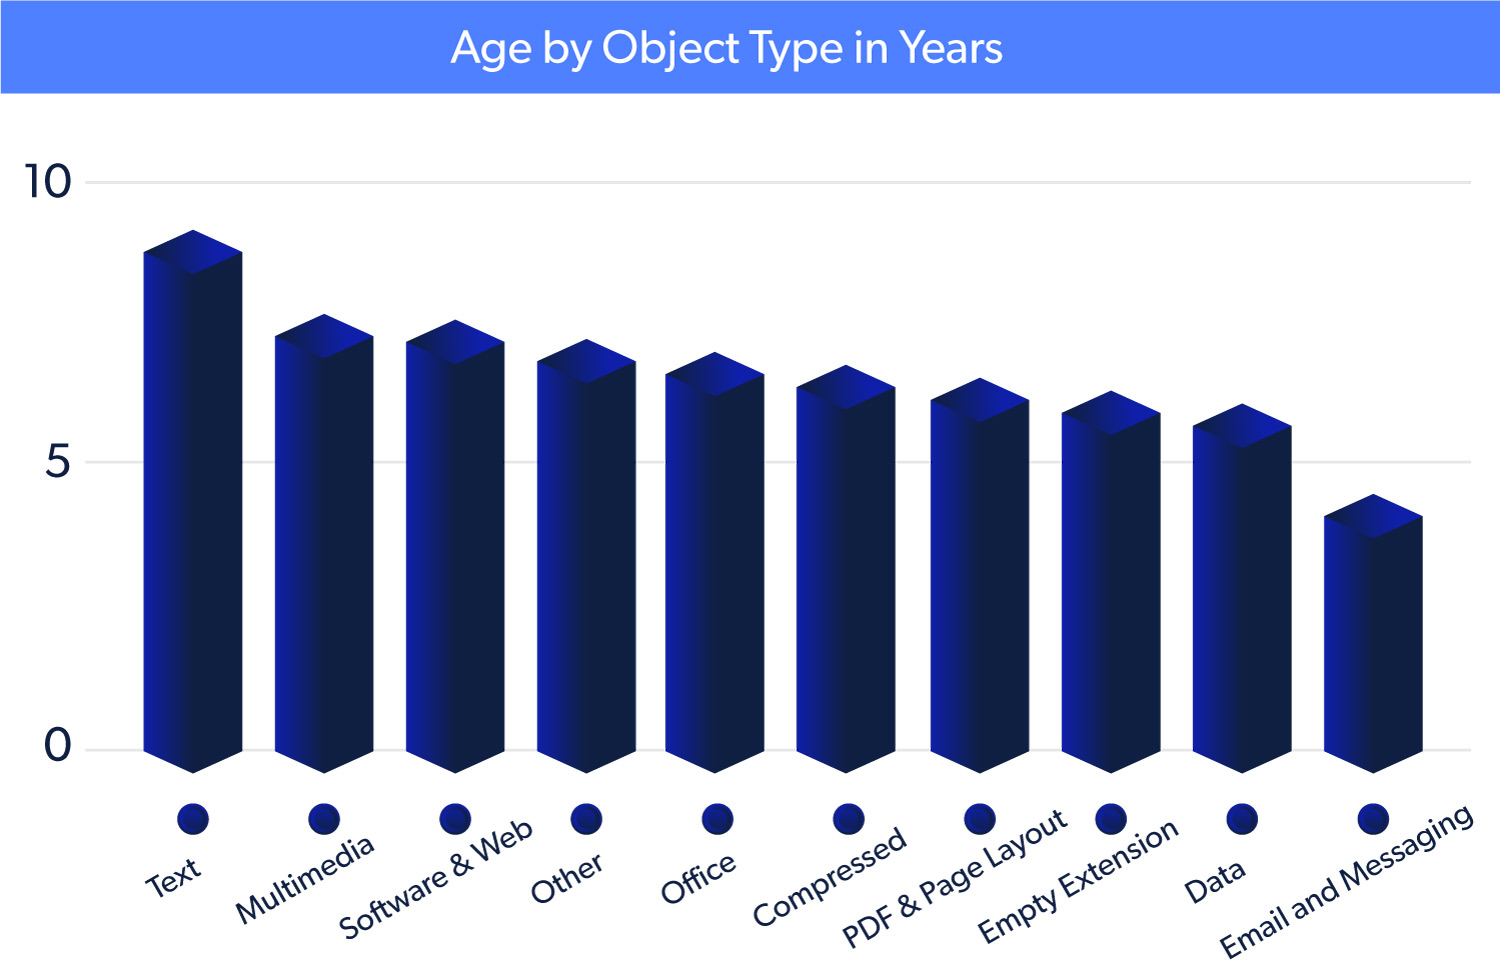 Age-by-Object-Type-in-Years-1